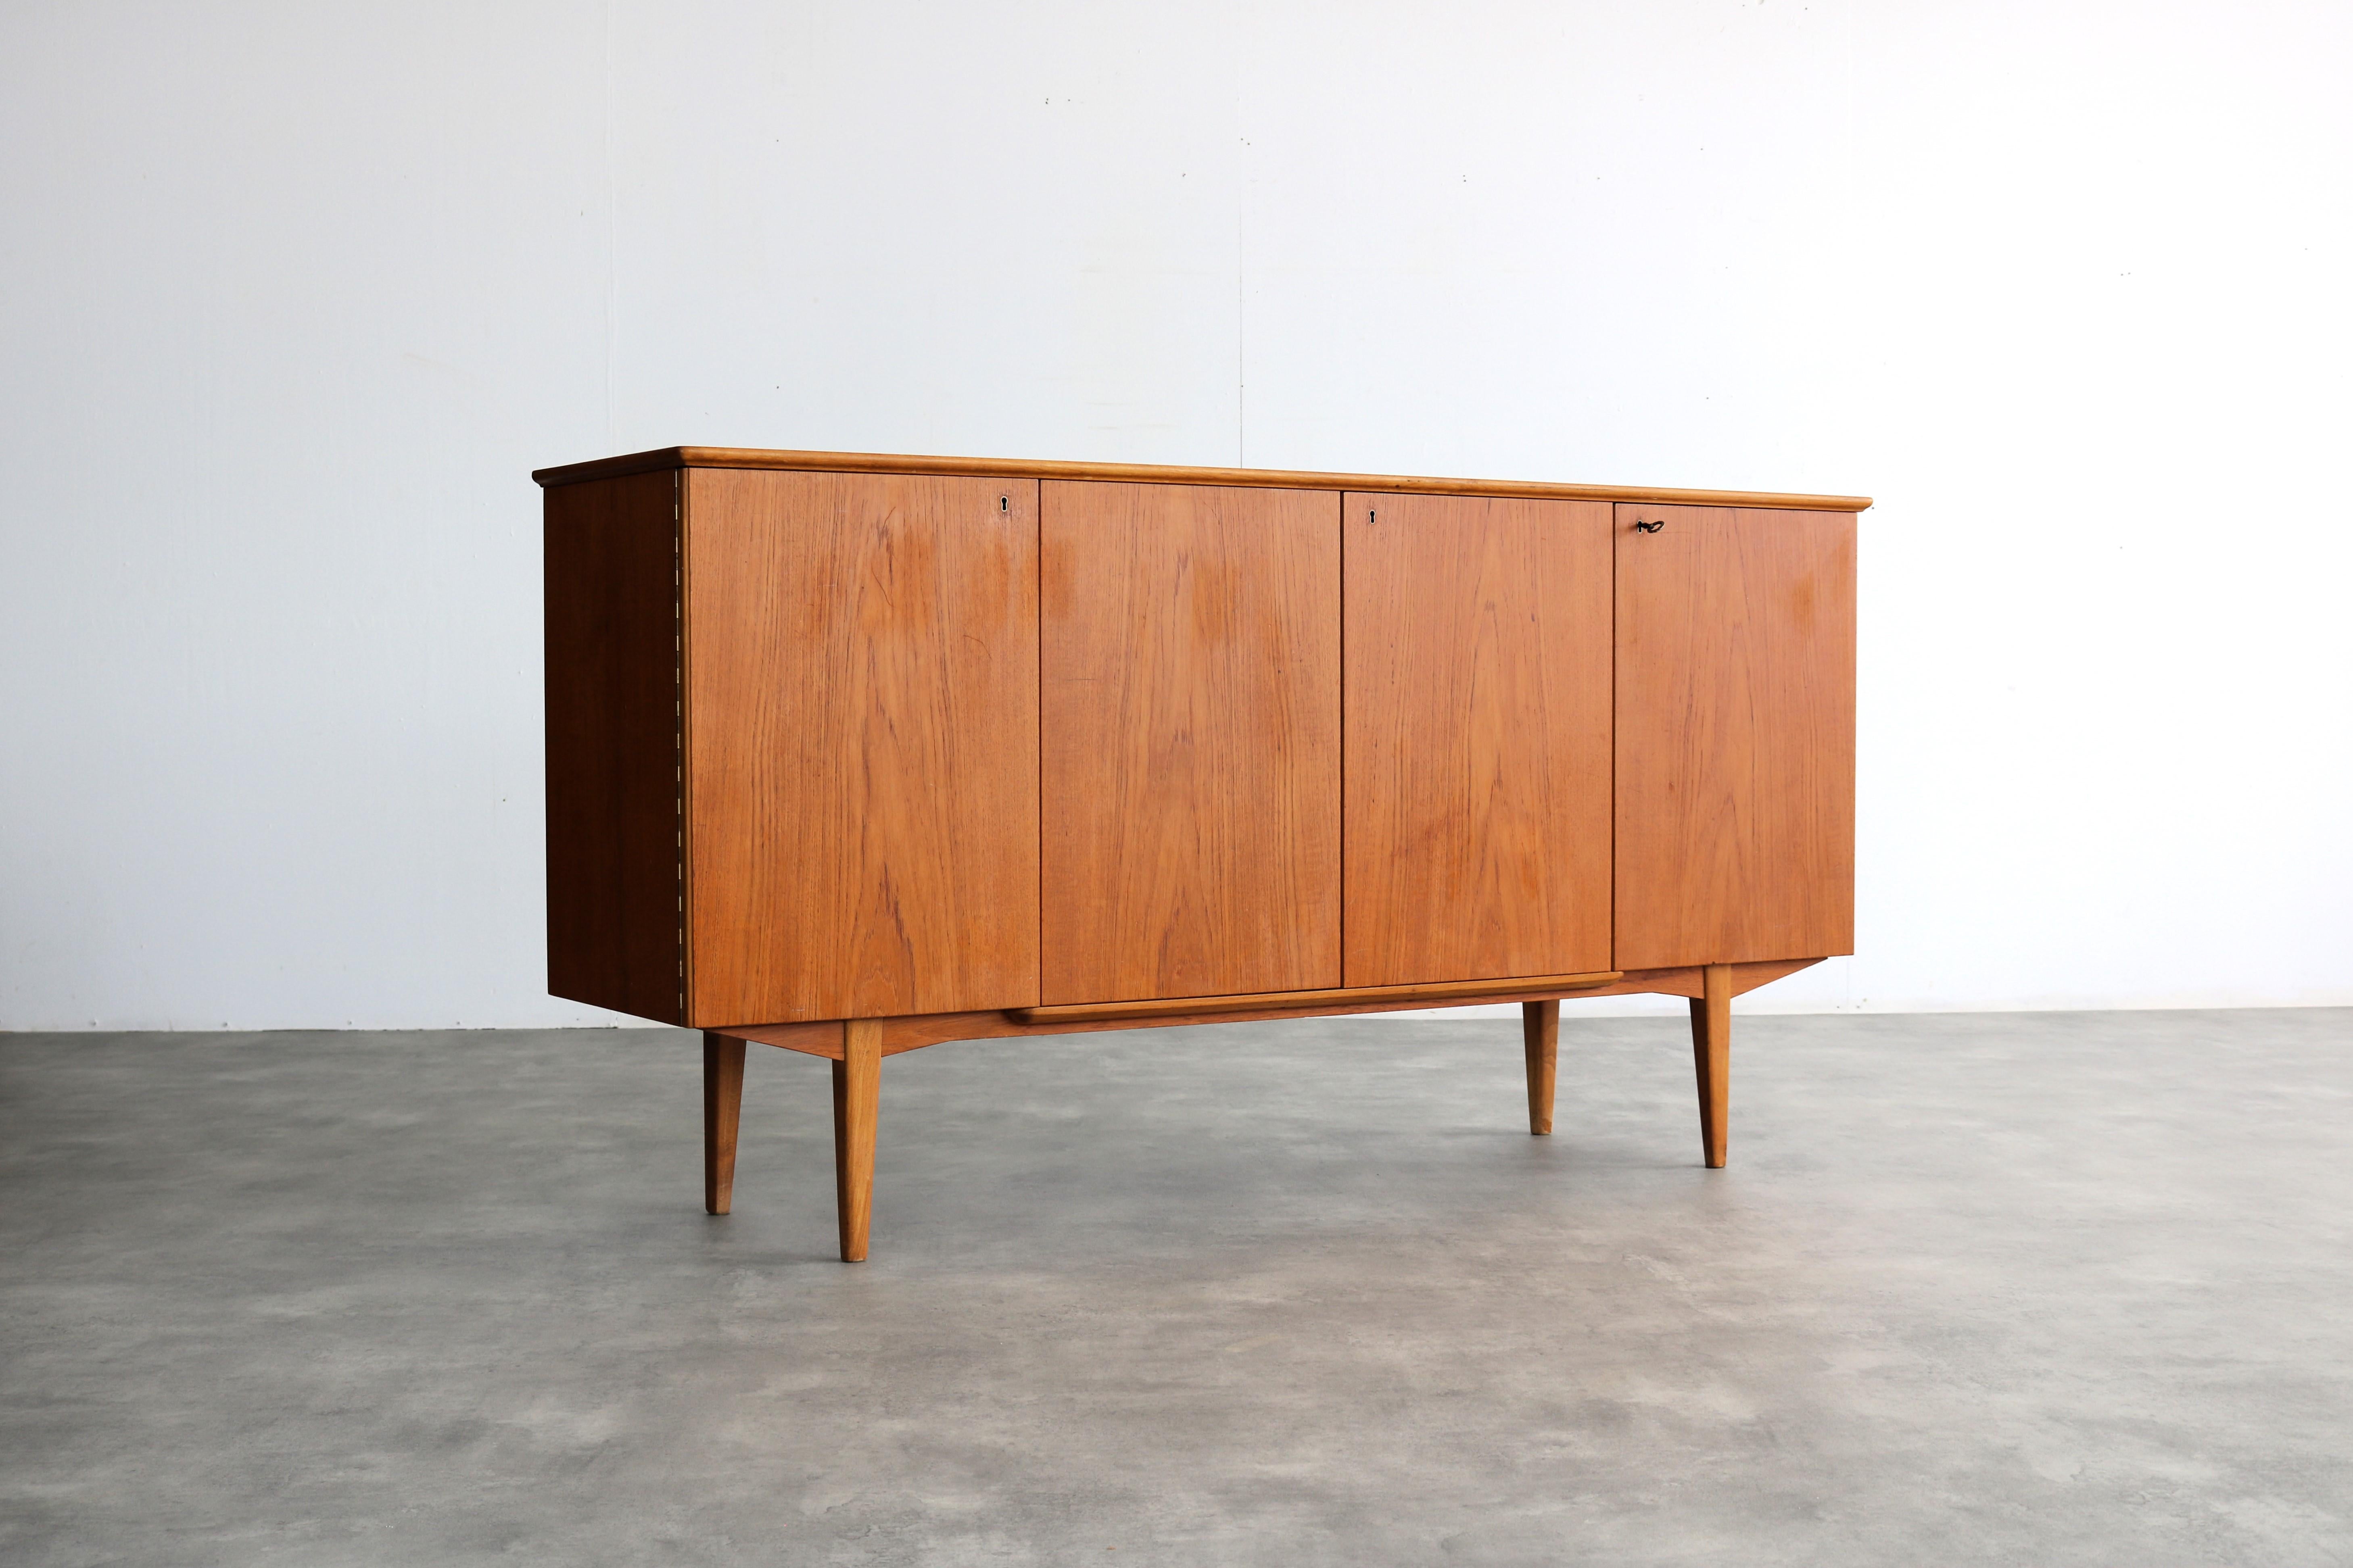 vintage sideboard | dresser | 60s | Swedish

period | 60's
designs | unknown | Sweden
conditions | good | light signs of use
size | 90 x 173 x 45 (hxwxd)

details | teak; oak;

article number | 2112